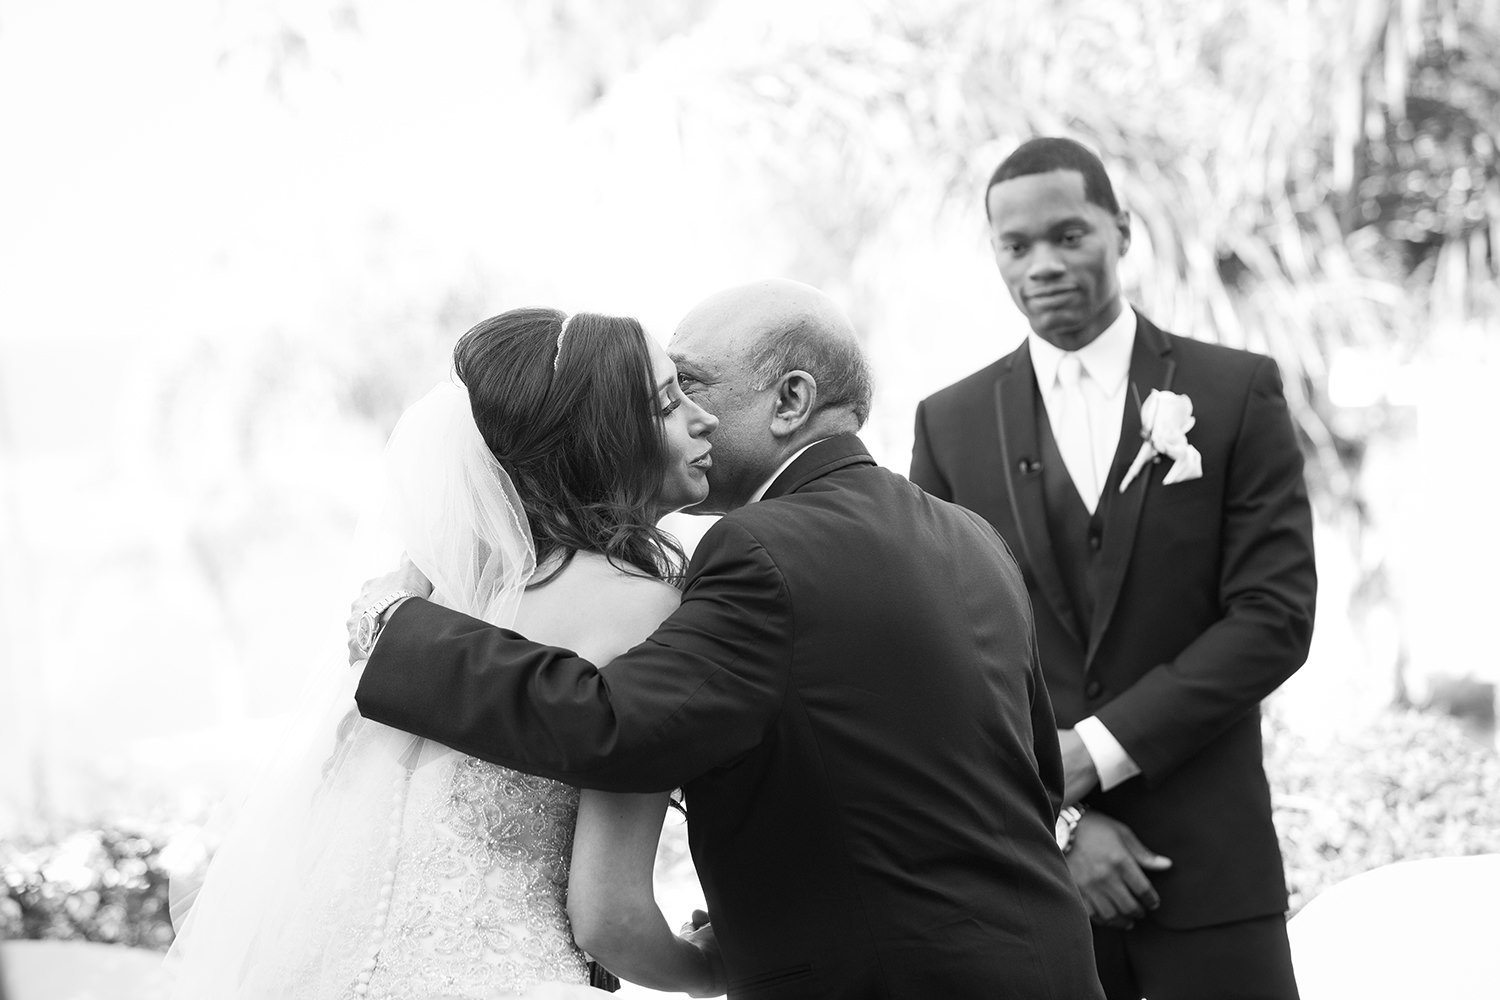 Sweet moment as the brides father gives her away at the ceremony